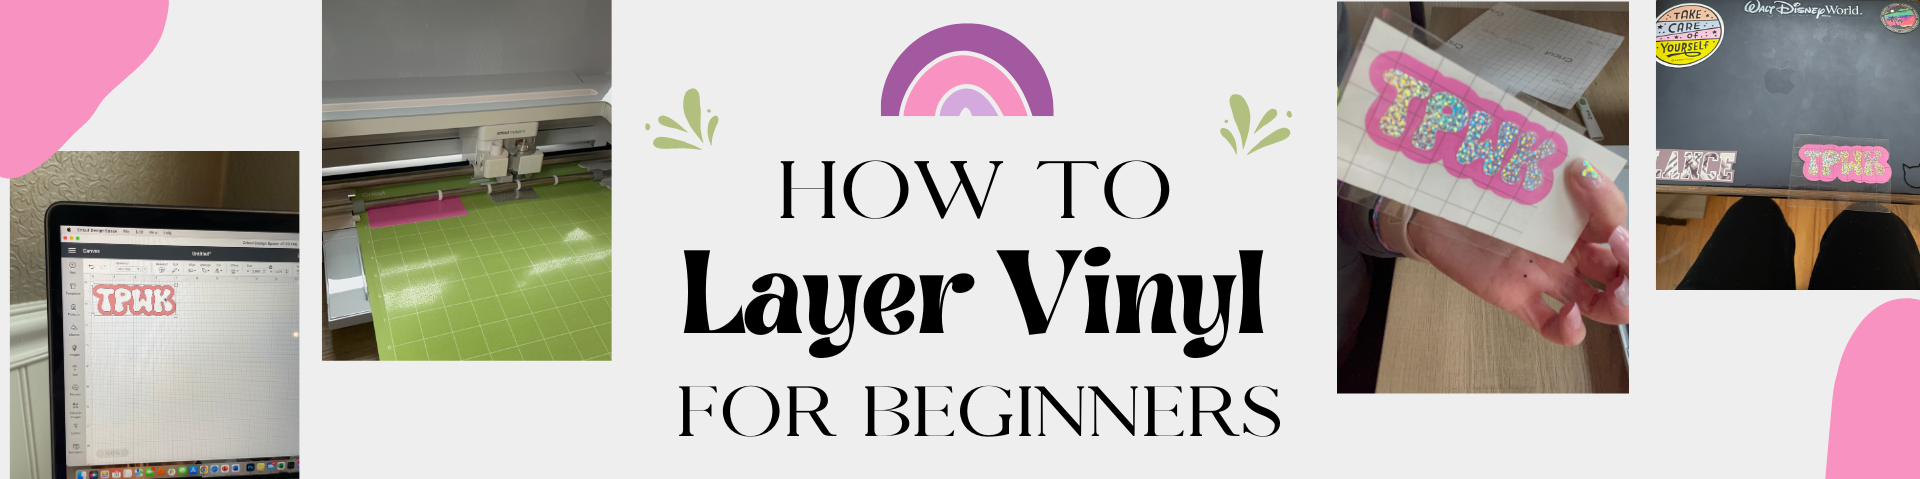 The different types of vinyl for your Cricut - Beginner's guide - NeliDesign